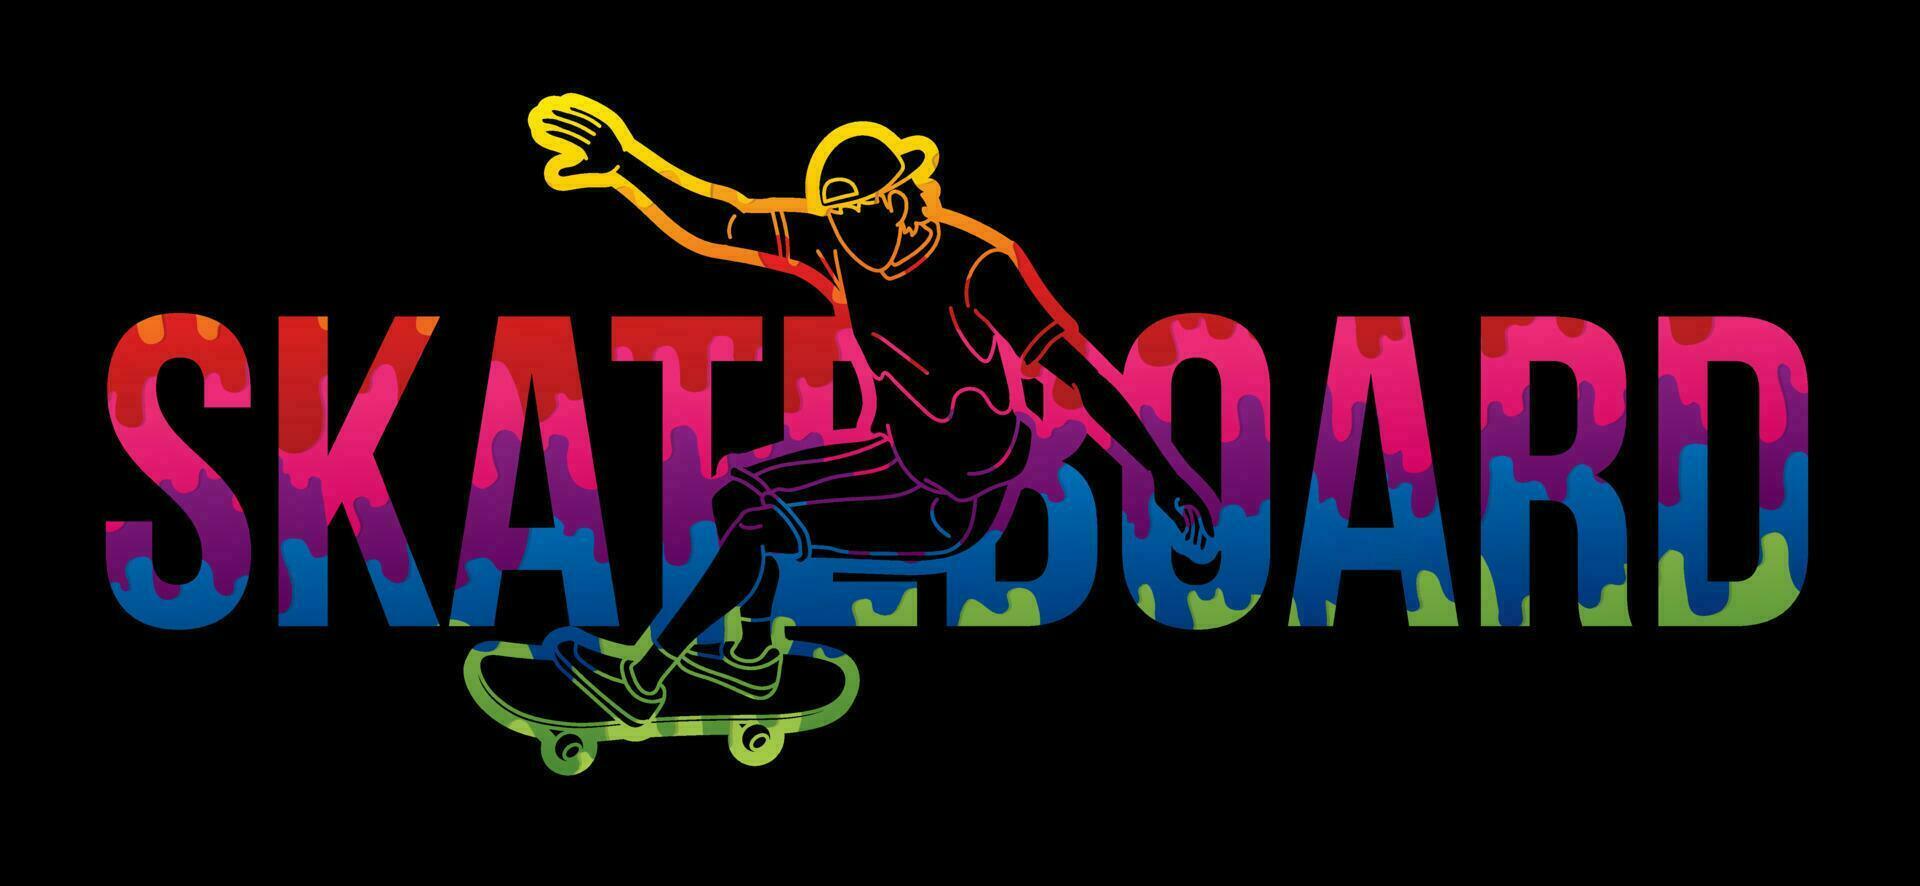 Skateboard and Skateboarder Action with Text Font Design vector